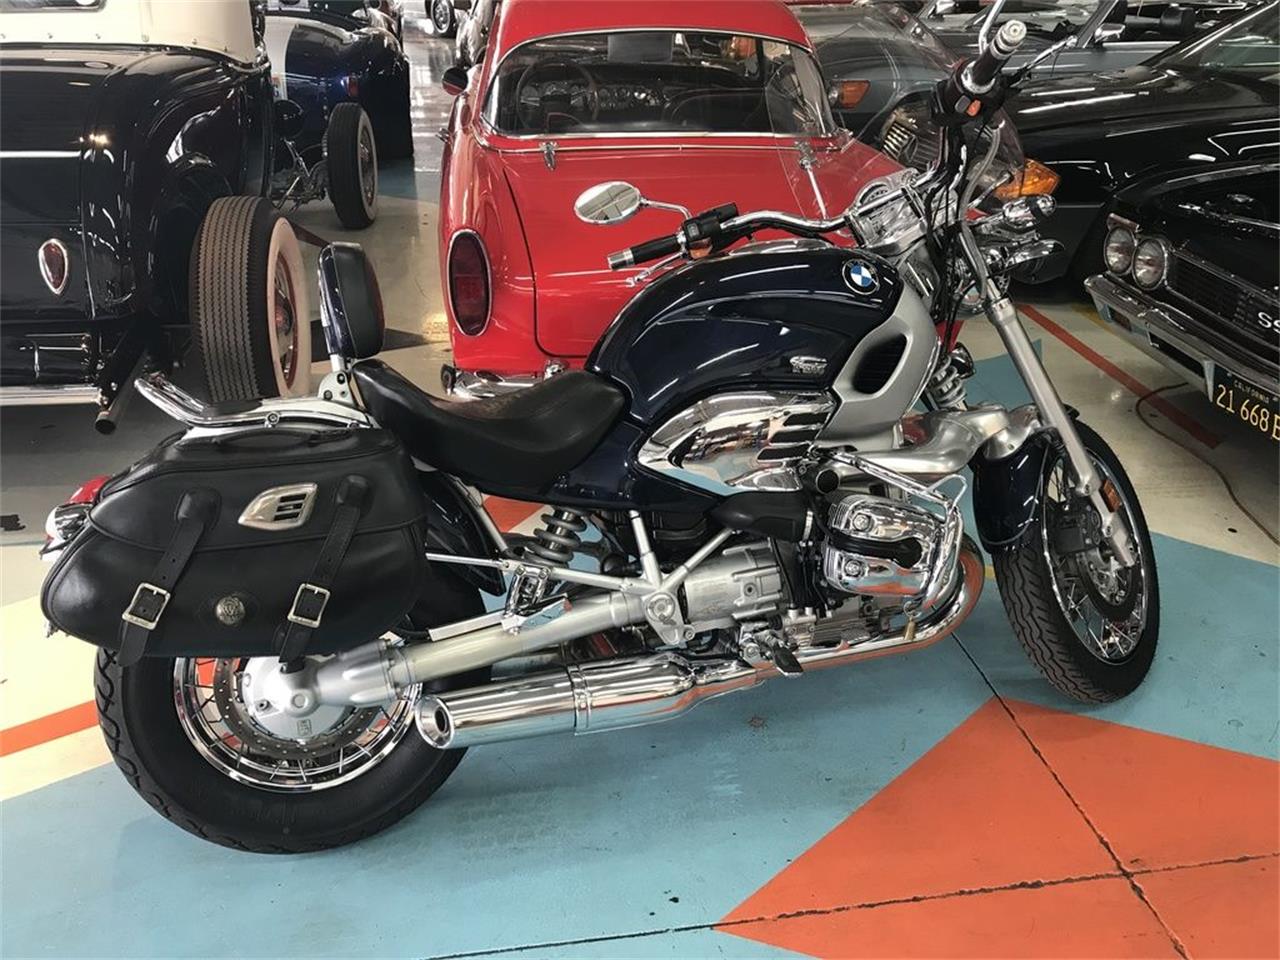 1998 BMW Motorcycle for Sale | ClassicCars.com | CC-1065423